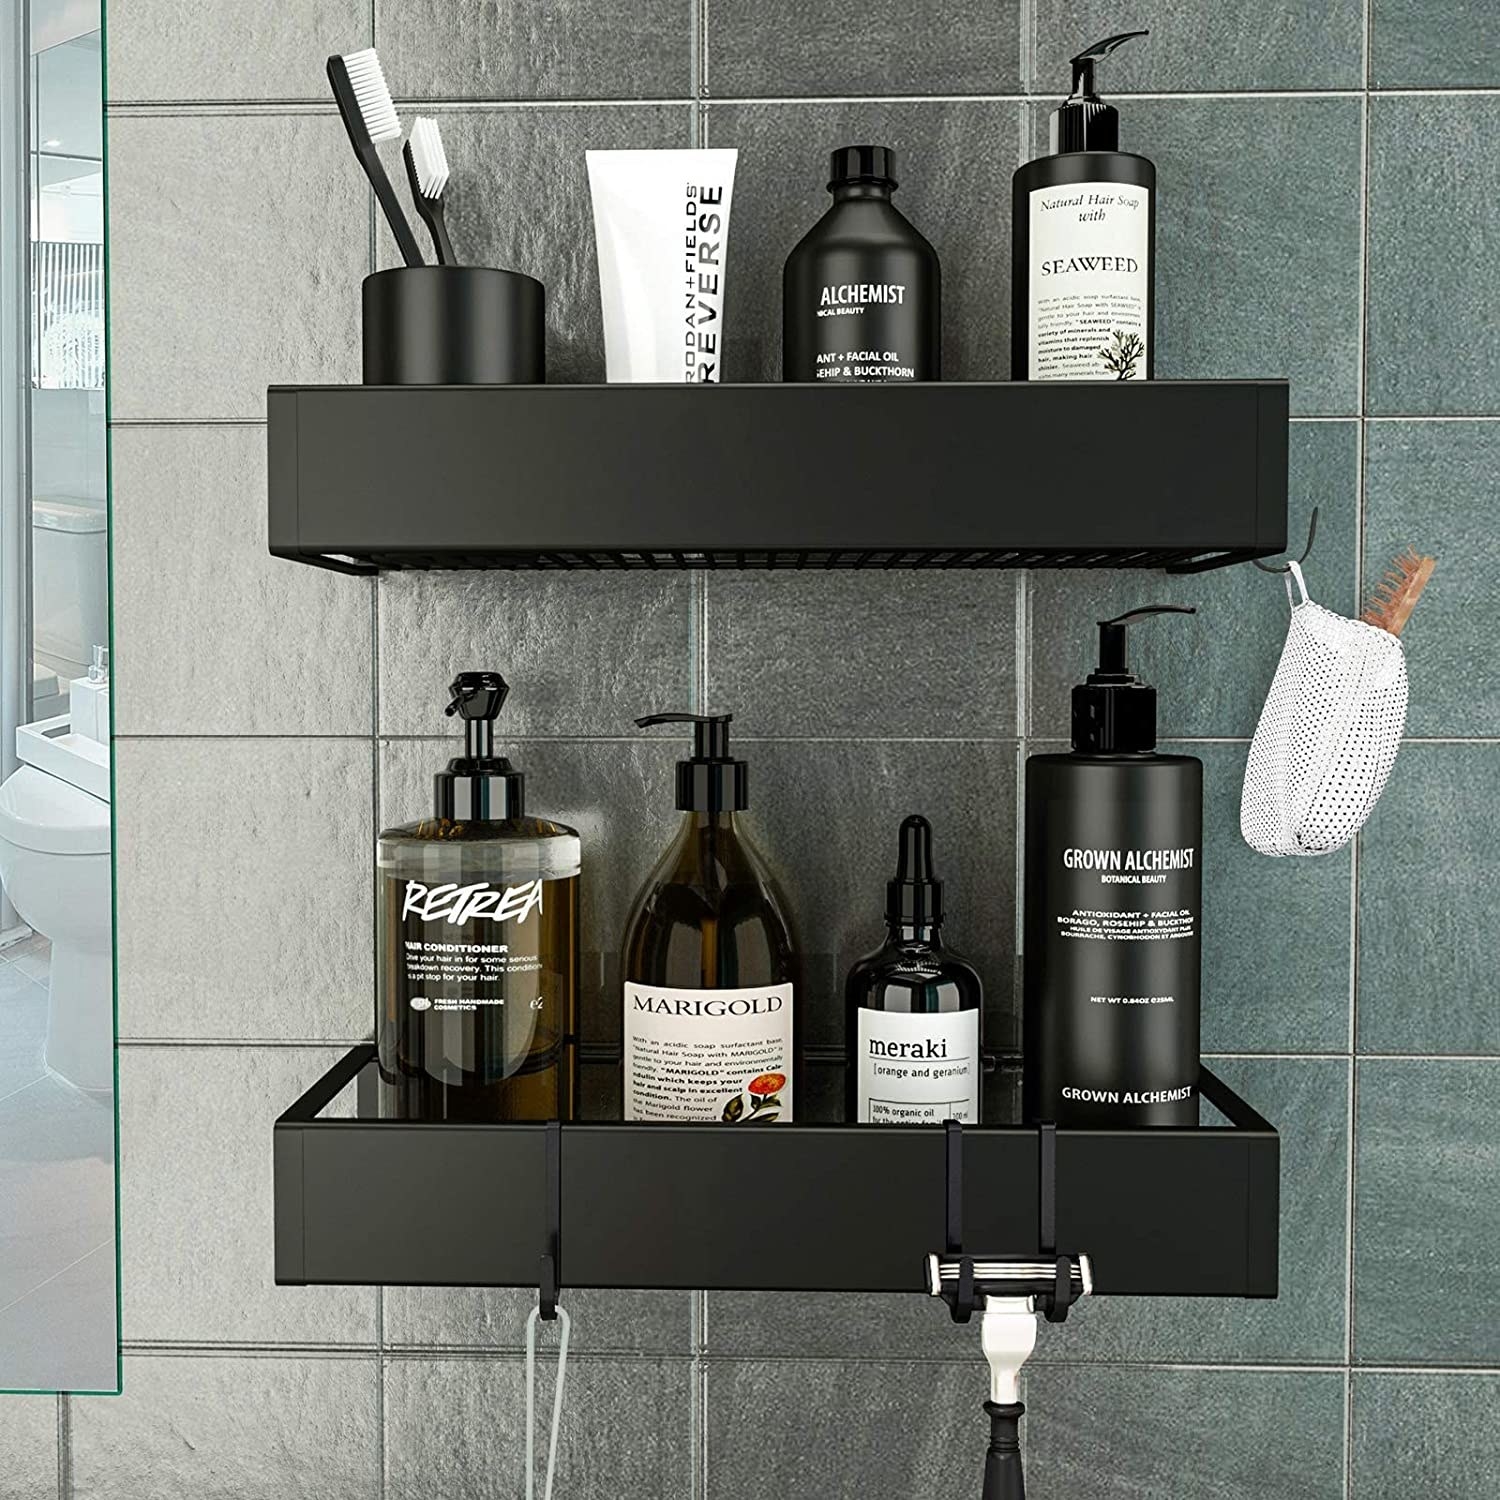 Several shower products on the adhesive shelves